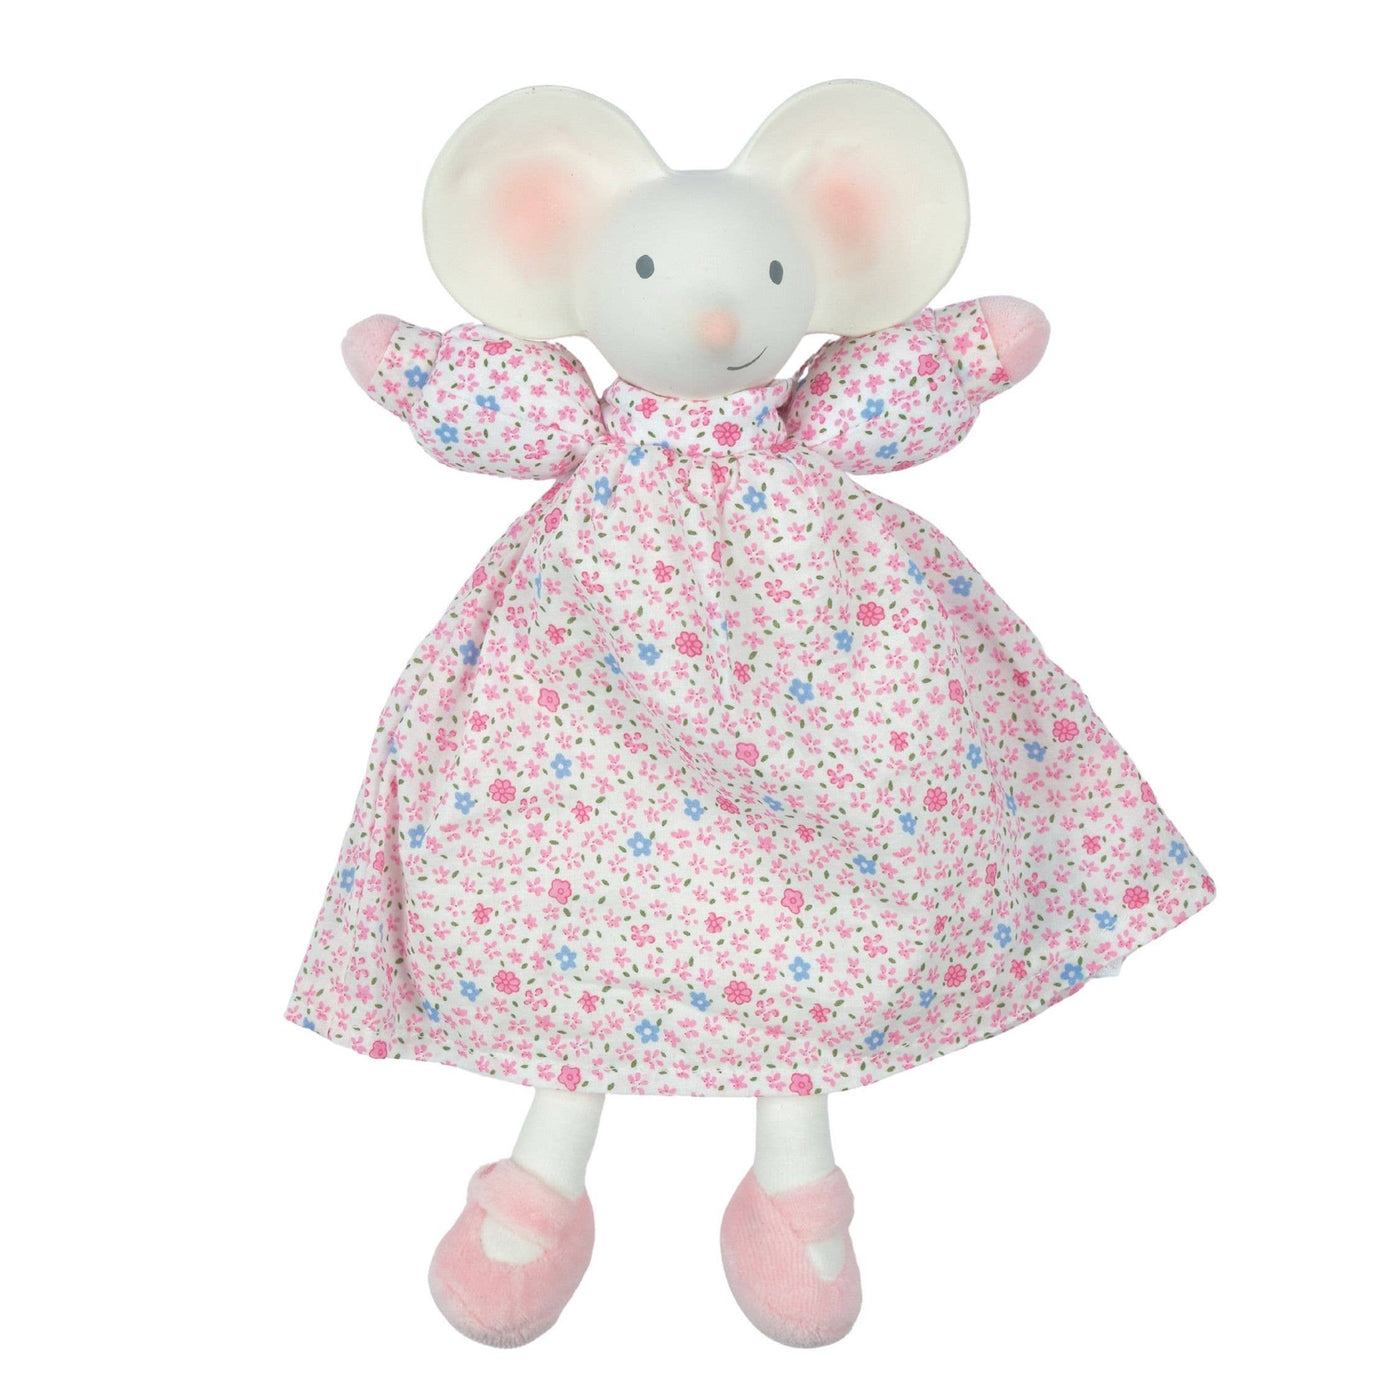 Tikiri Toys LLC - Meiya the Mouse - Lovey with Rubber Head in Floral Dress - Mumzie's Children